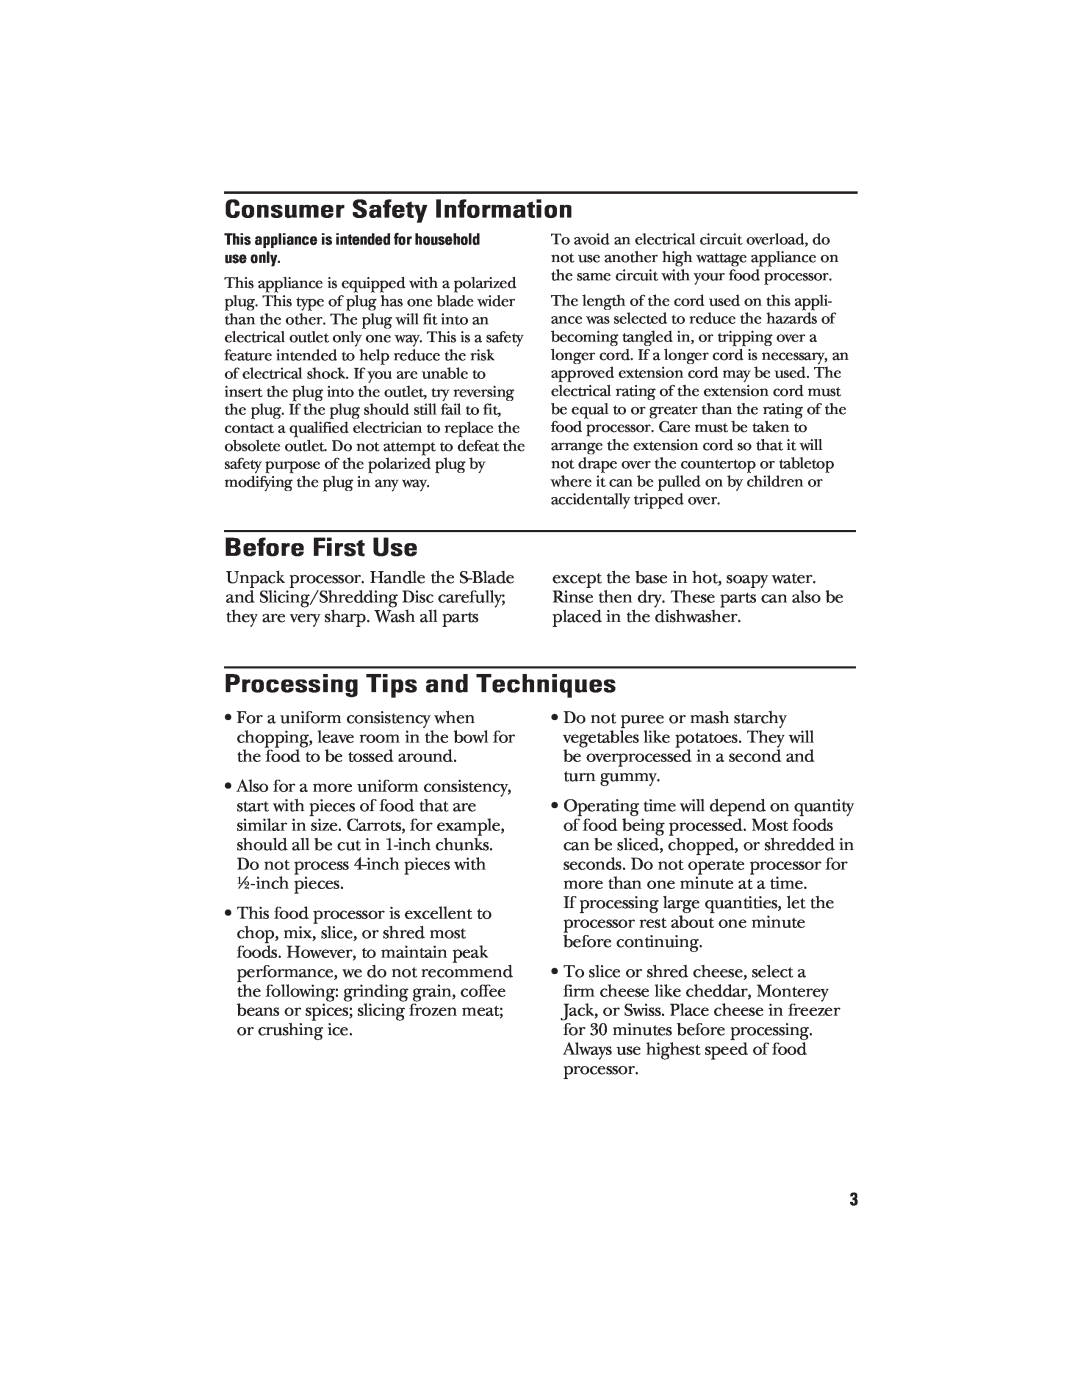 GE 840074400 manual Consumer Safety Information, Before First Use, Processing Tips and Techniques 